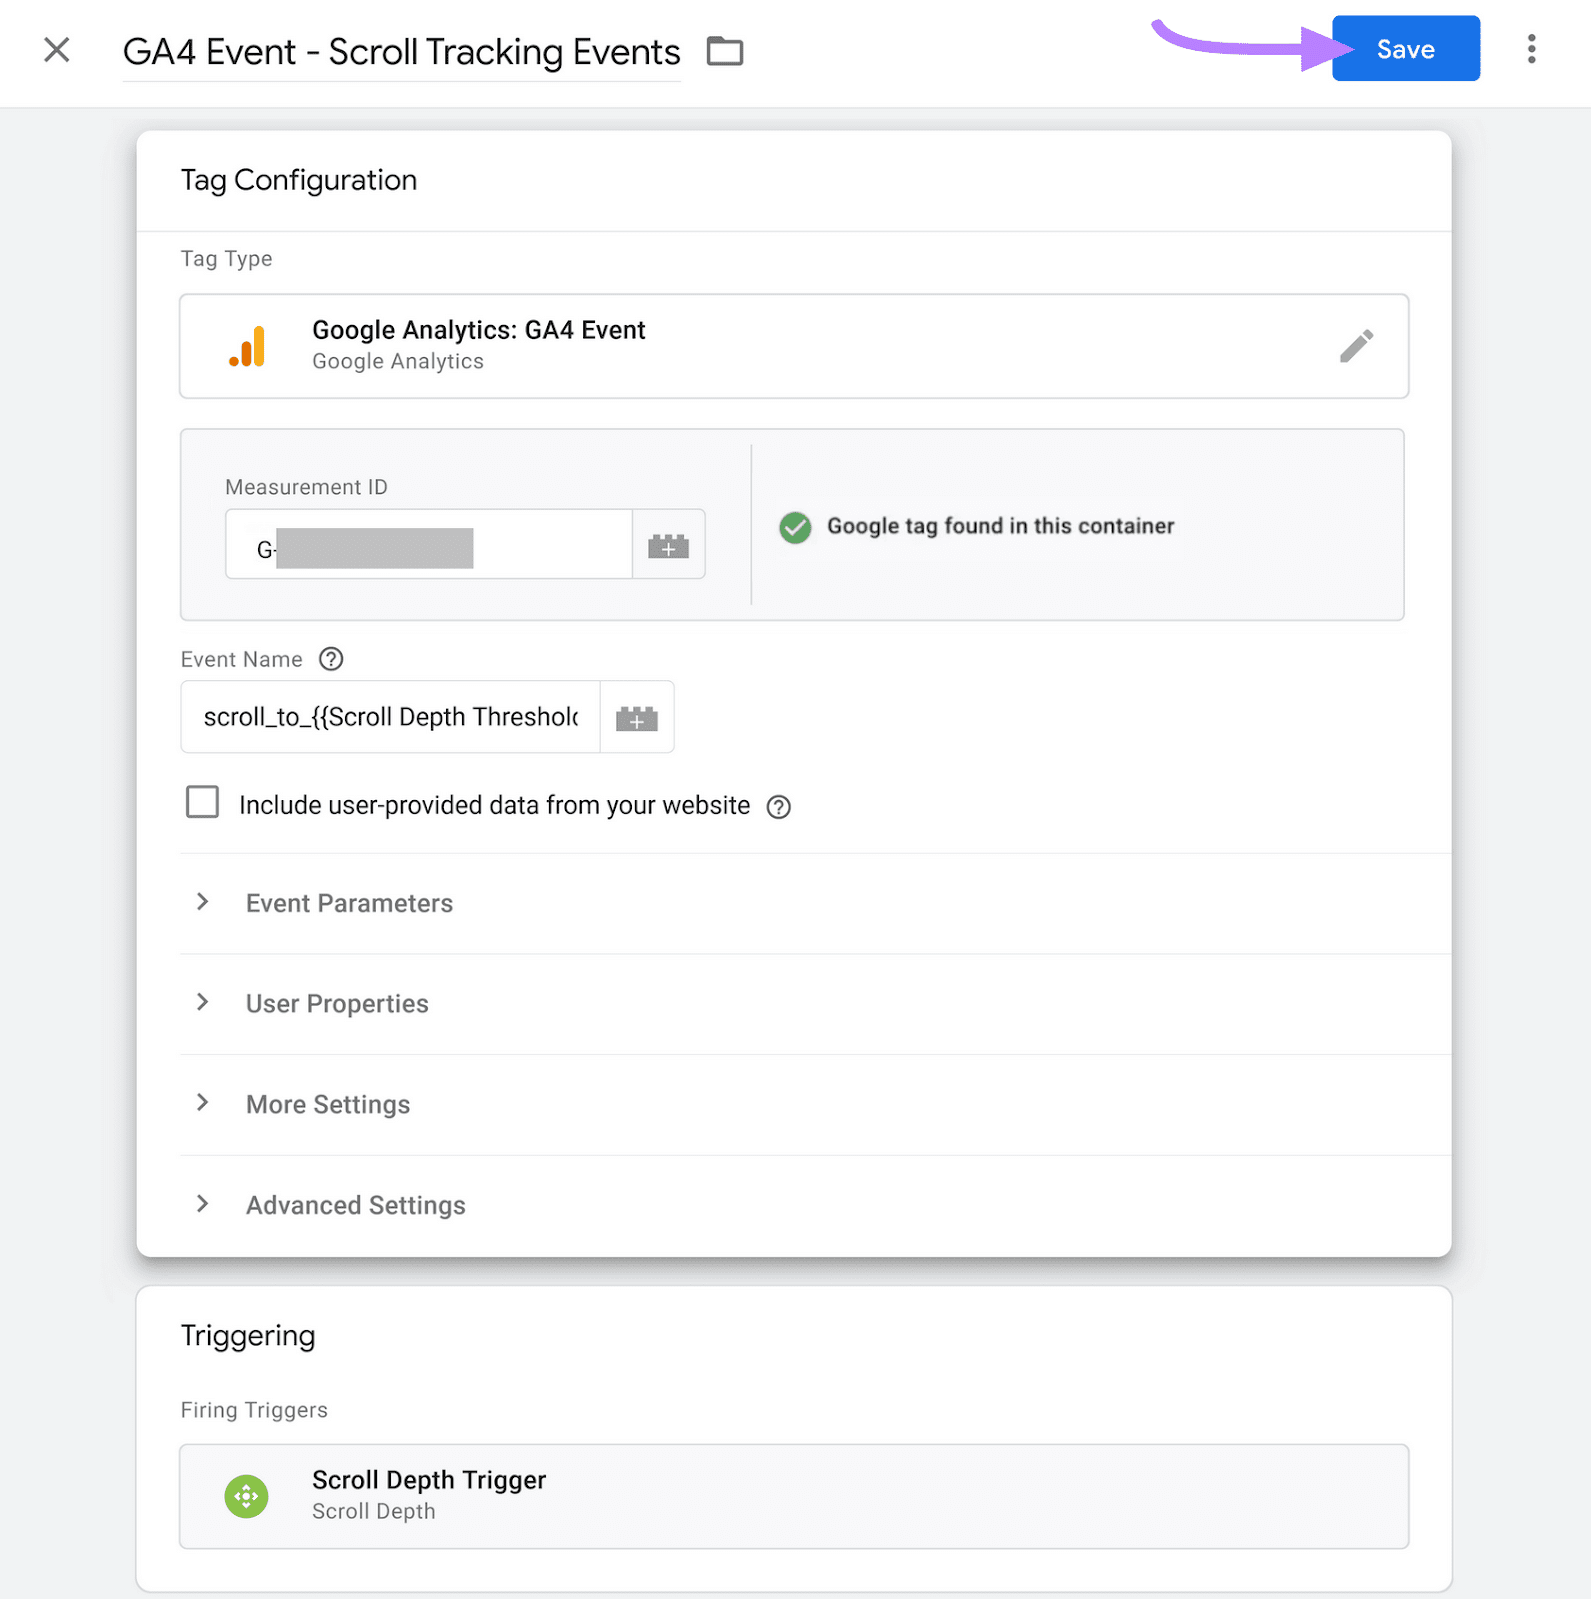 Save your GA4 event tag paired with scroll depth trigger